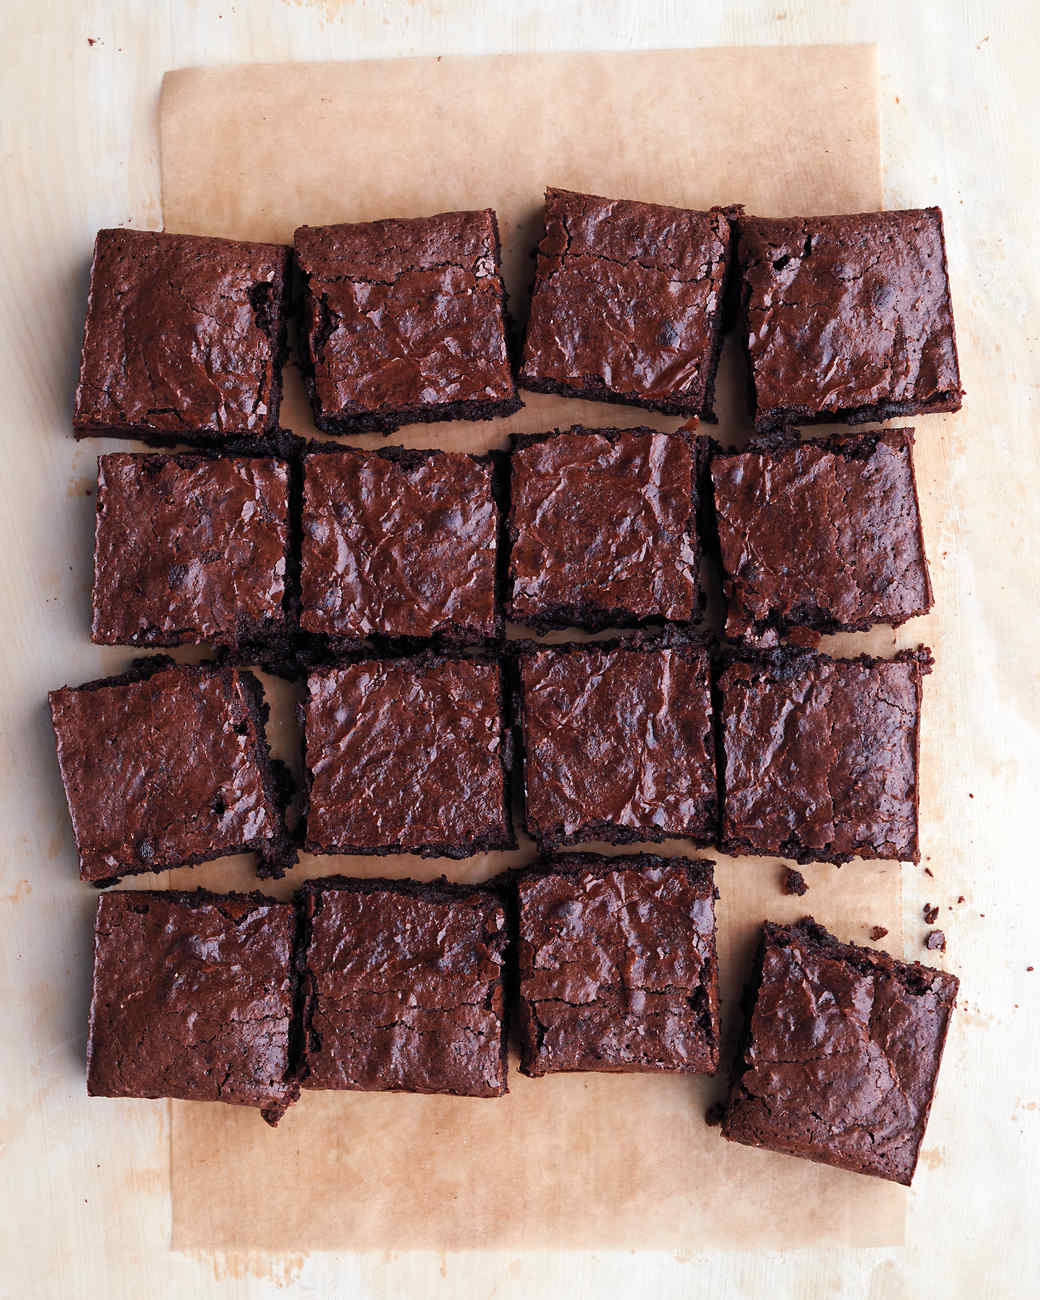 Image result for brownies